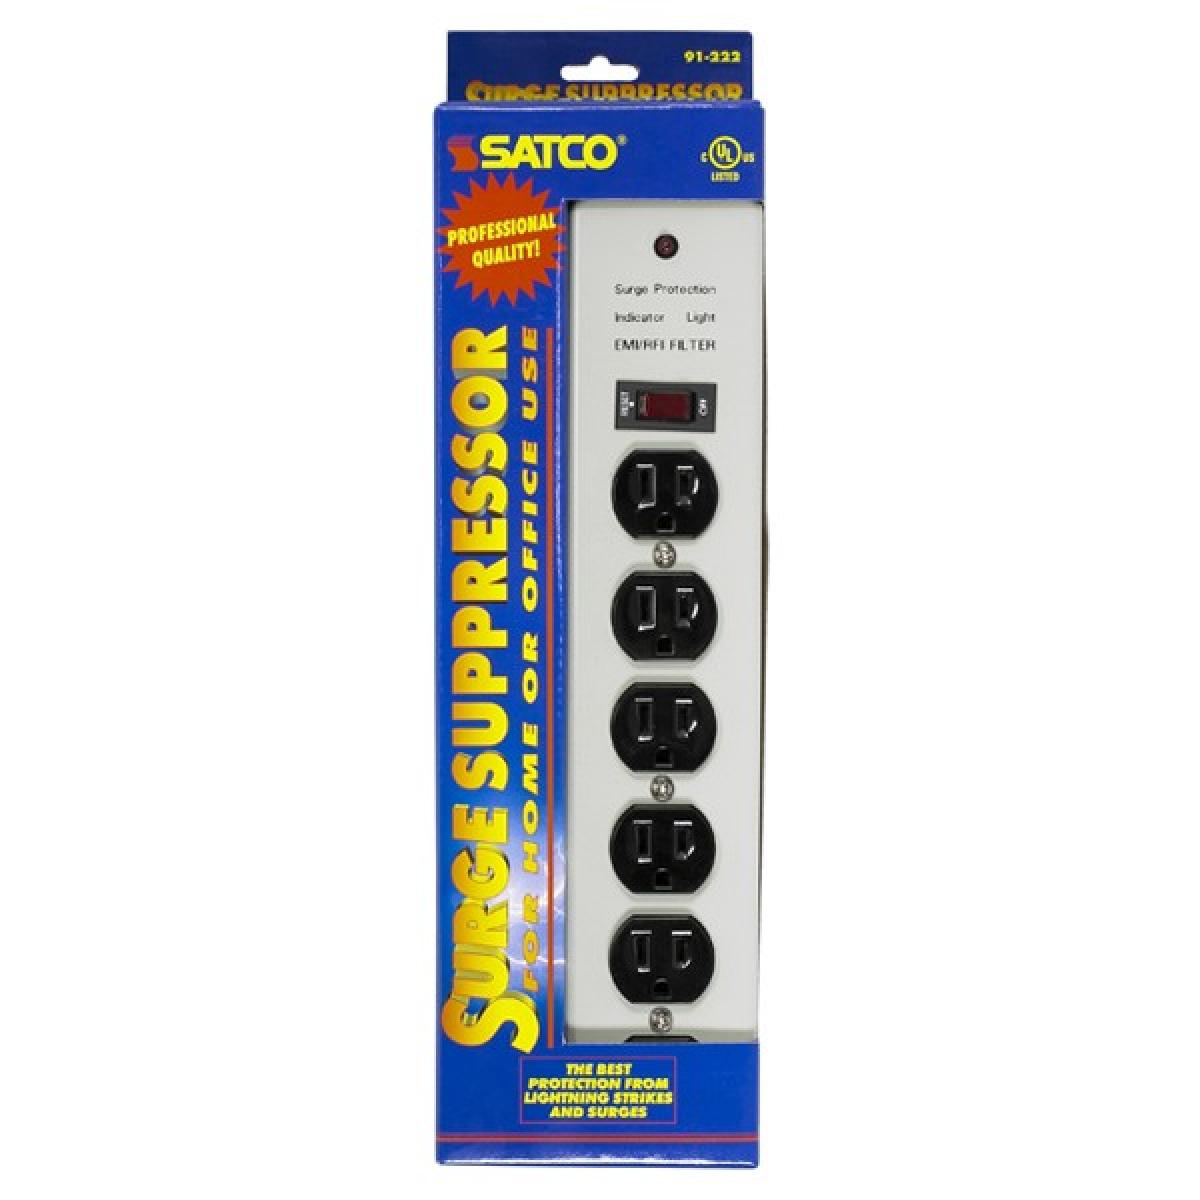 Satco 91-222 6 Outlet Professional Metal Surge Strip 4 Foot Cord 14/3 SJT Indoor Use Only 540 Joules 15A-120V 1800W